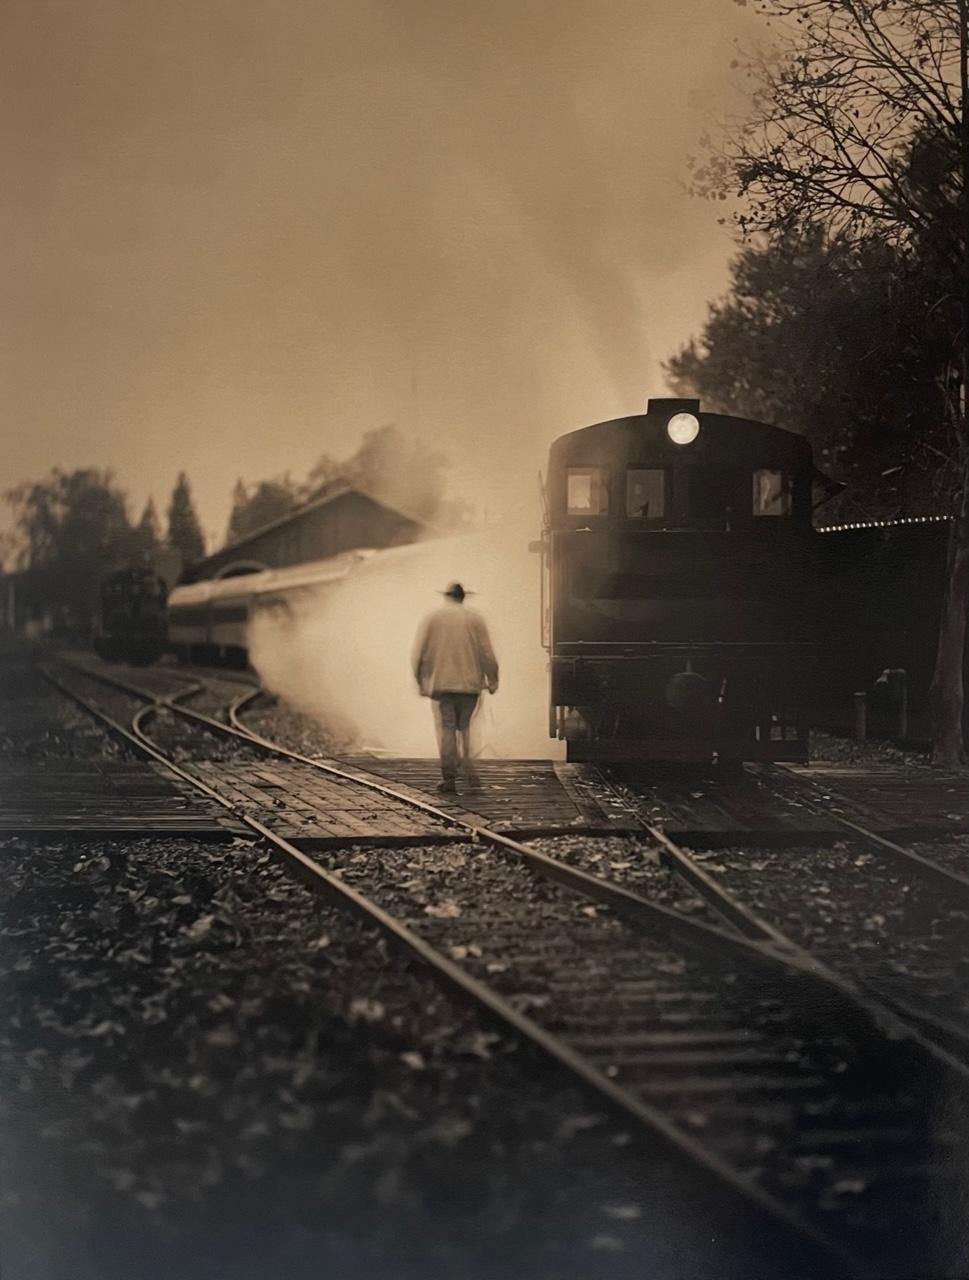 Phil Kember Black and White Photograph - In The Yard, Train Yard With Worker Sepia Toned